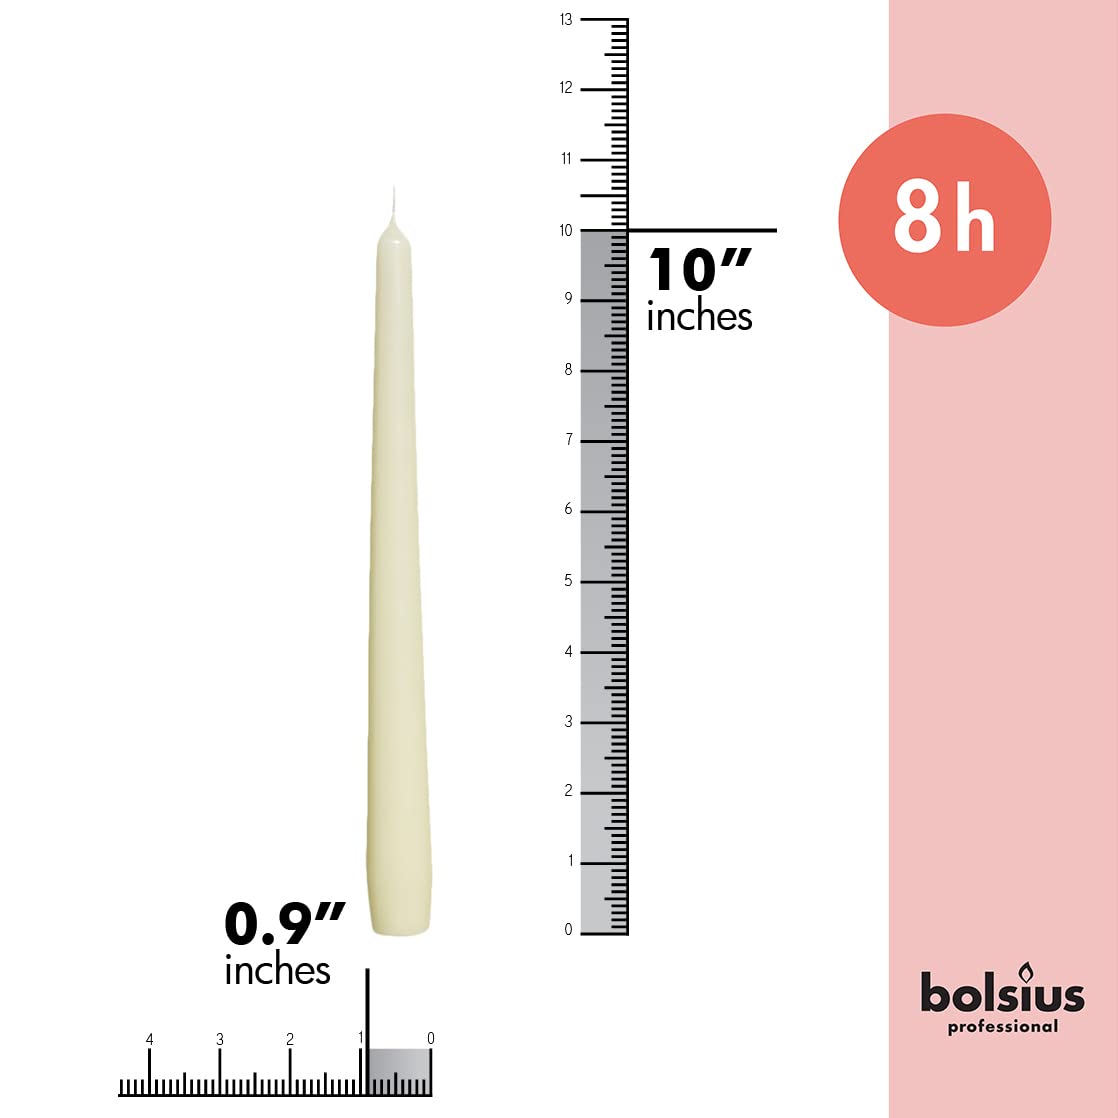 BOLSIUS Long Household Taper Candles - 10-inch Unscented Premium Quality Wax  - Very Good